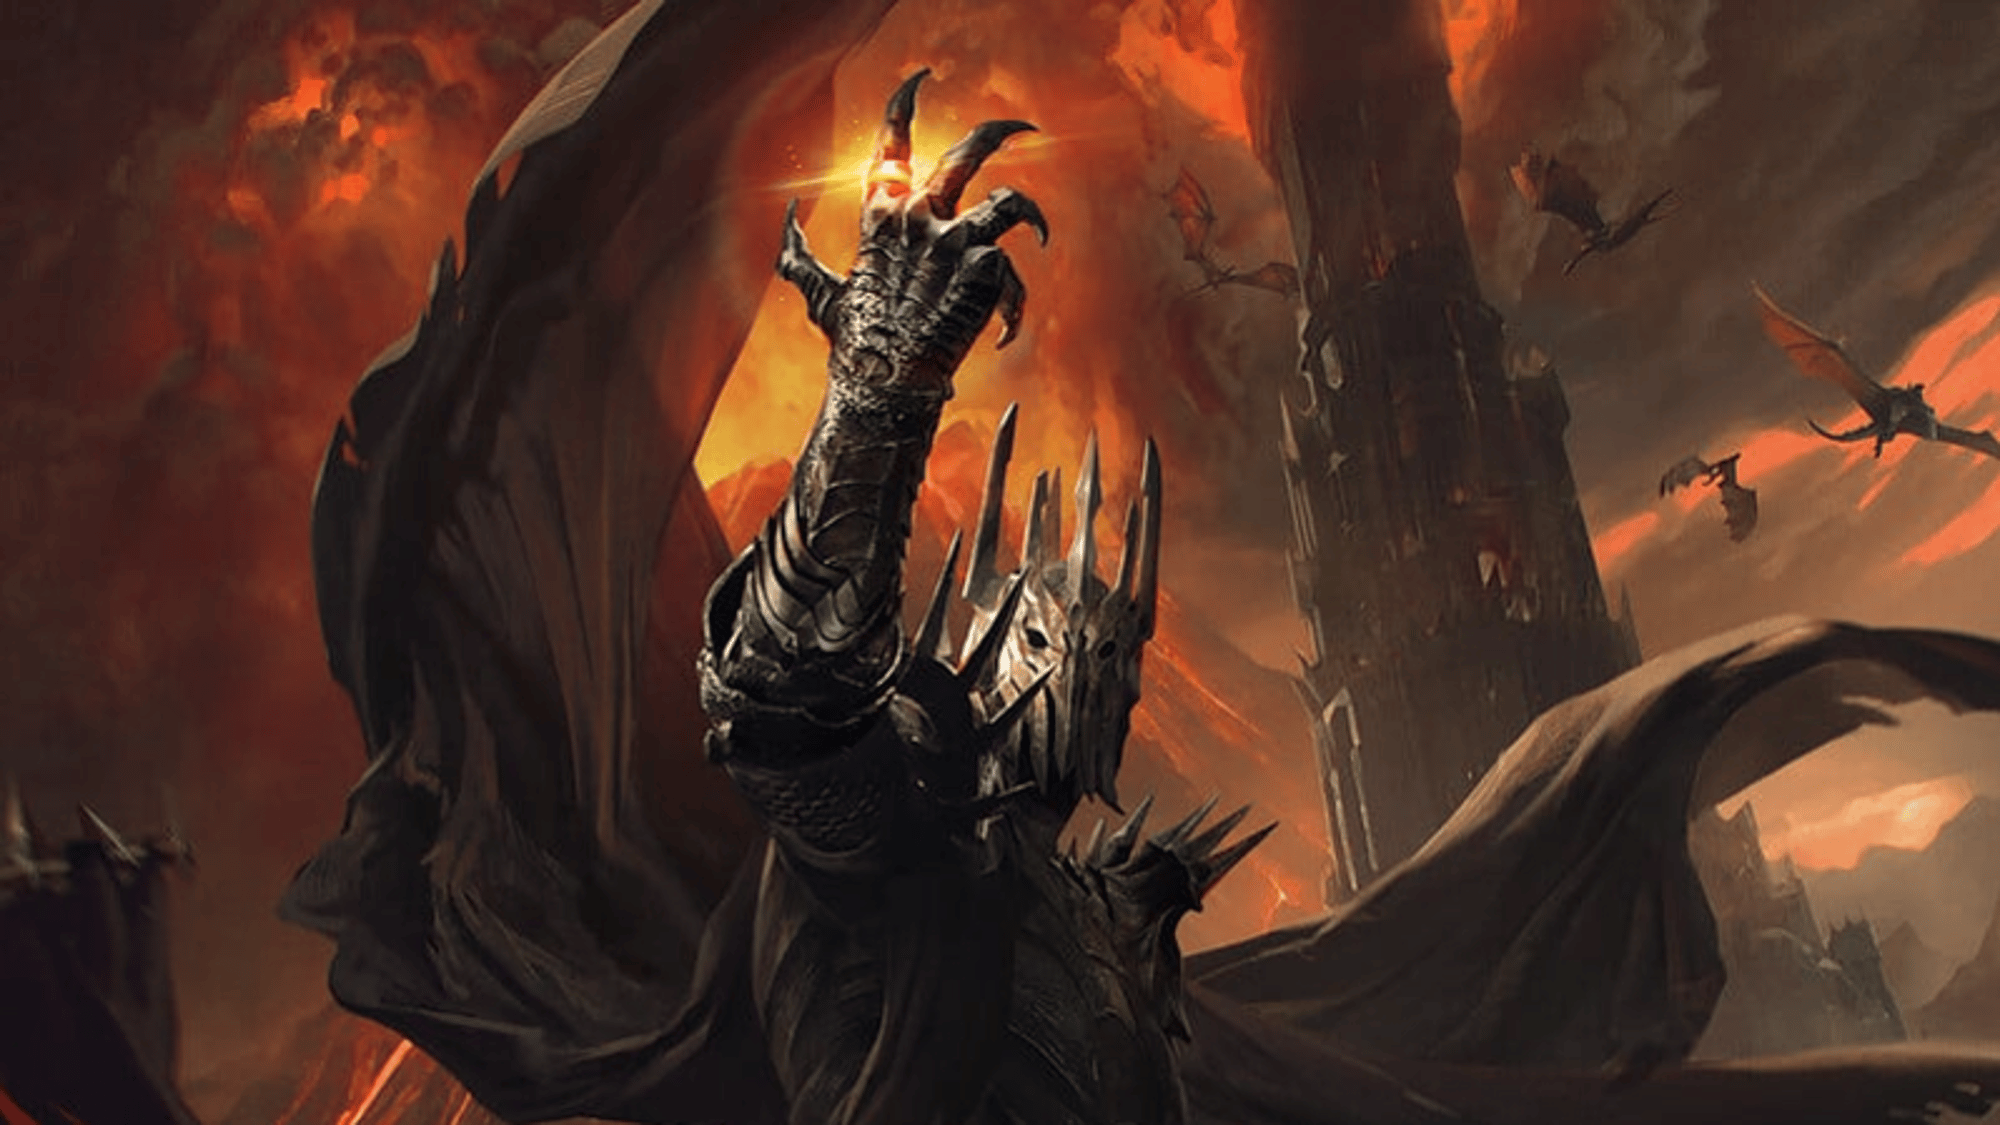 Sauron(Lord of the Rings)